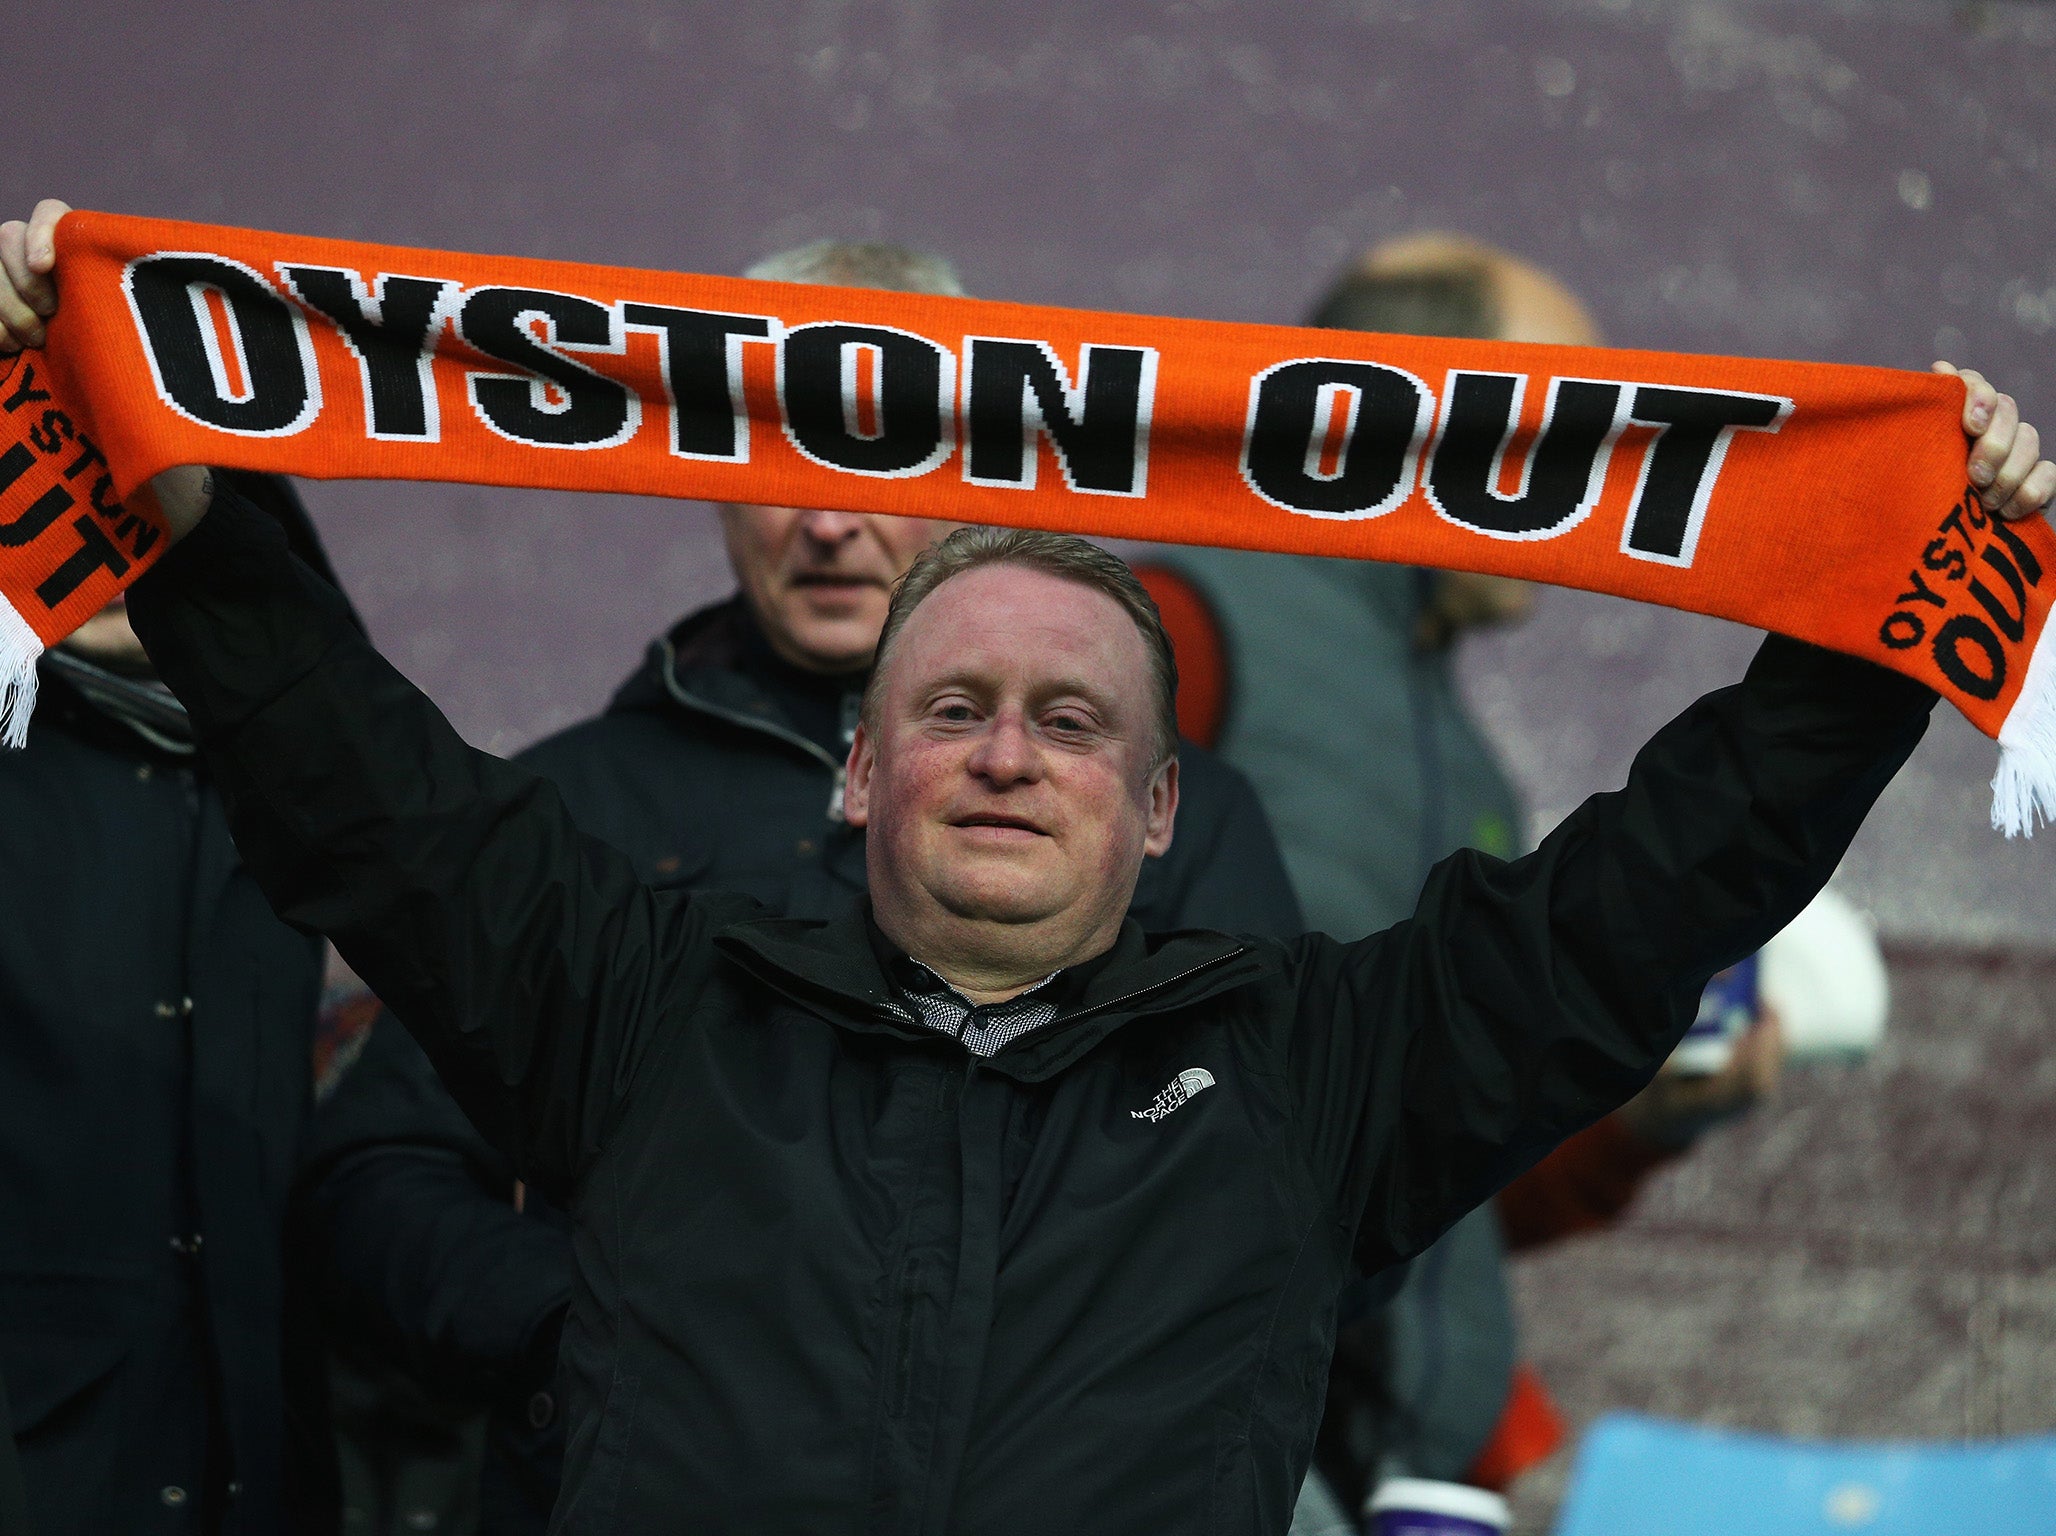 Karl Oyston replaced as Blackpool chairman by Natalie Christopher